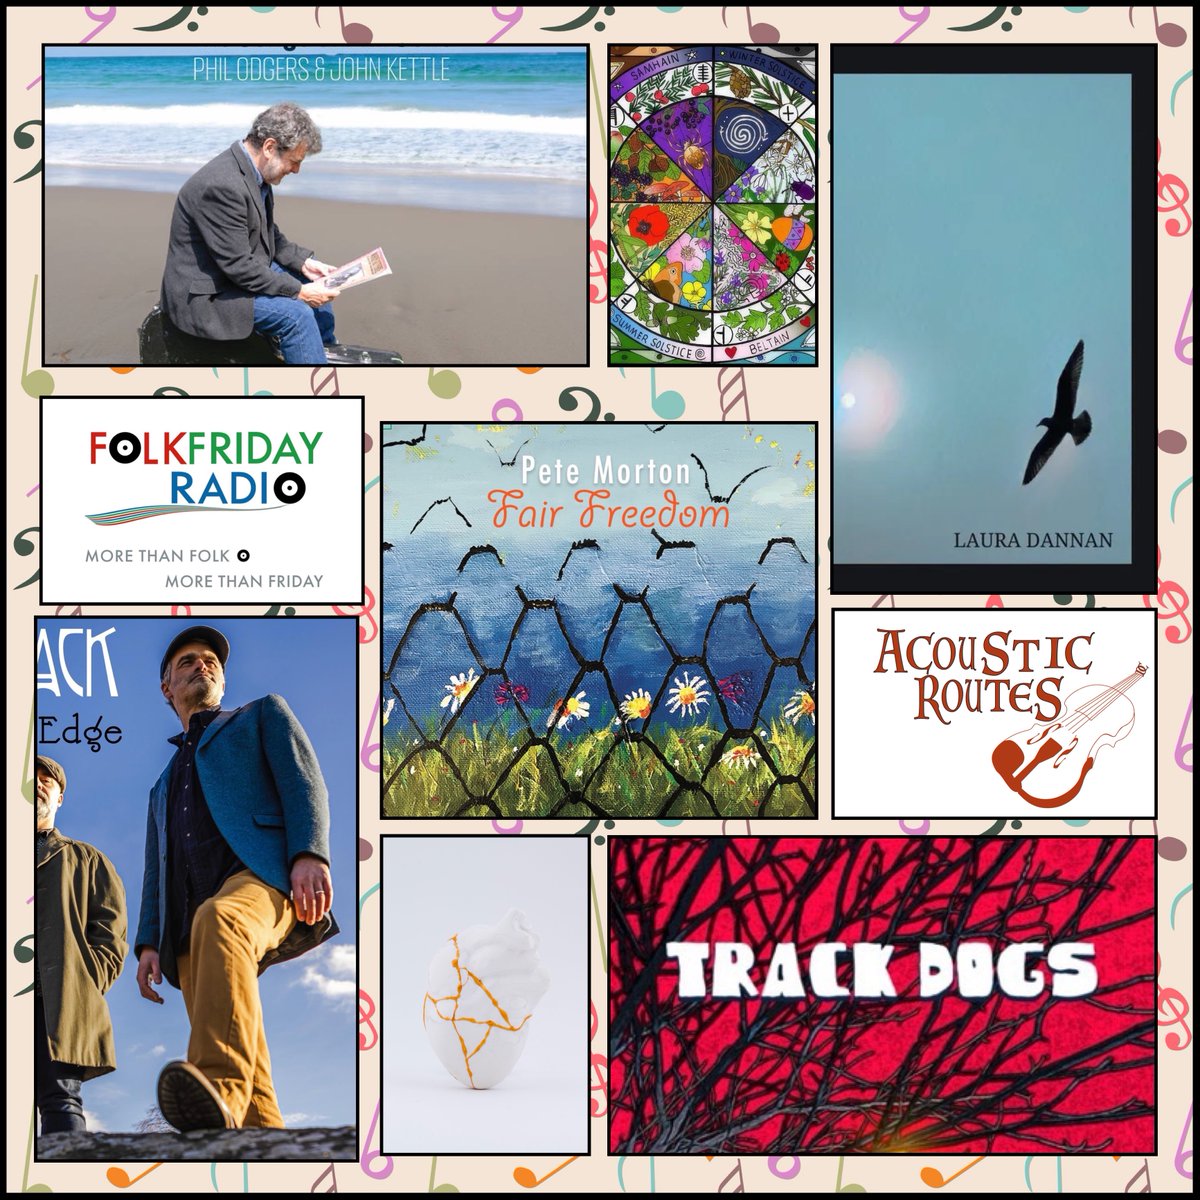 On this week’s @AcousticRoutes, show 493, the featured album is from @petemortonmusic & there will be music from @TangleJackBand @lauradannan @smalltownjones @TheCooleysBand @TrackDogsMusic @SwillOdgers @FaunOfficial and more. Tune in to @folkfridayradio Friday 11pm U.K. time